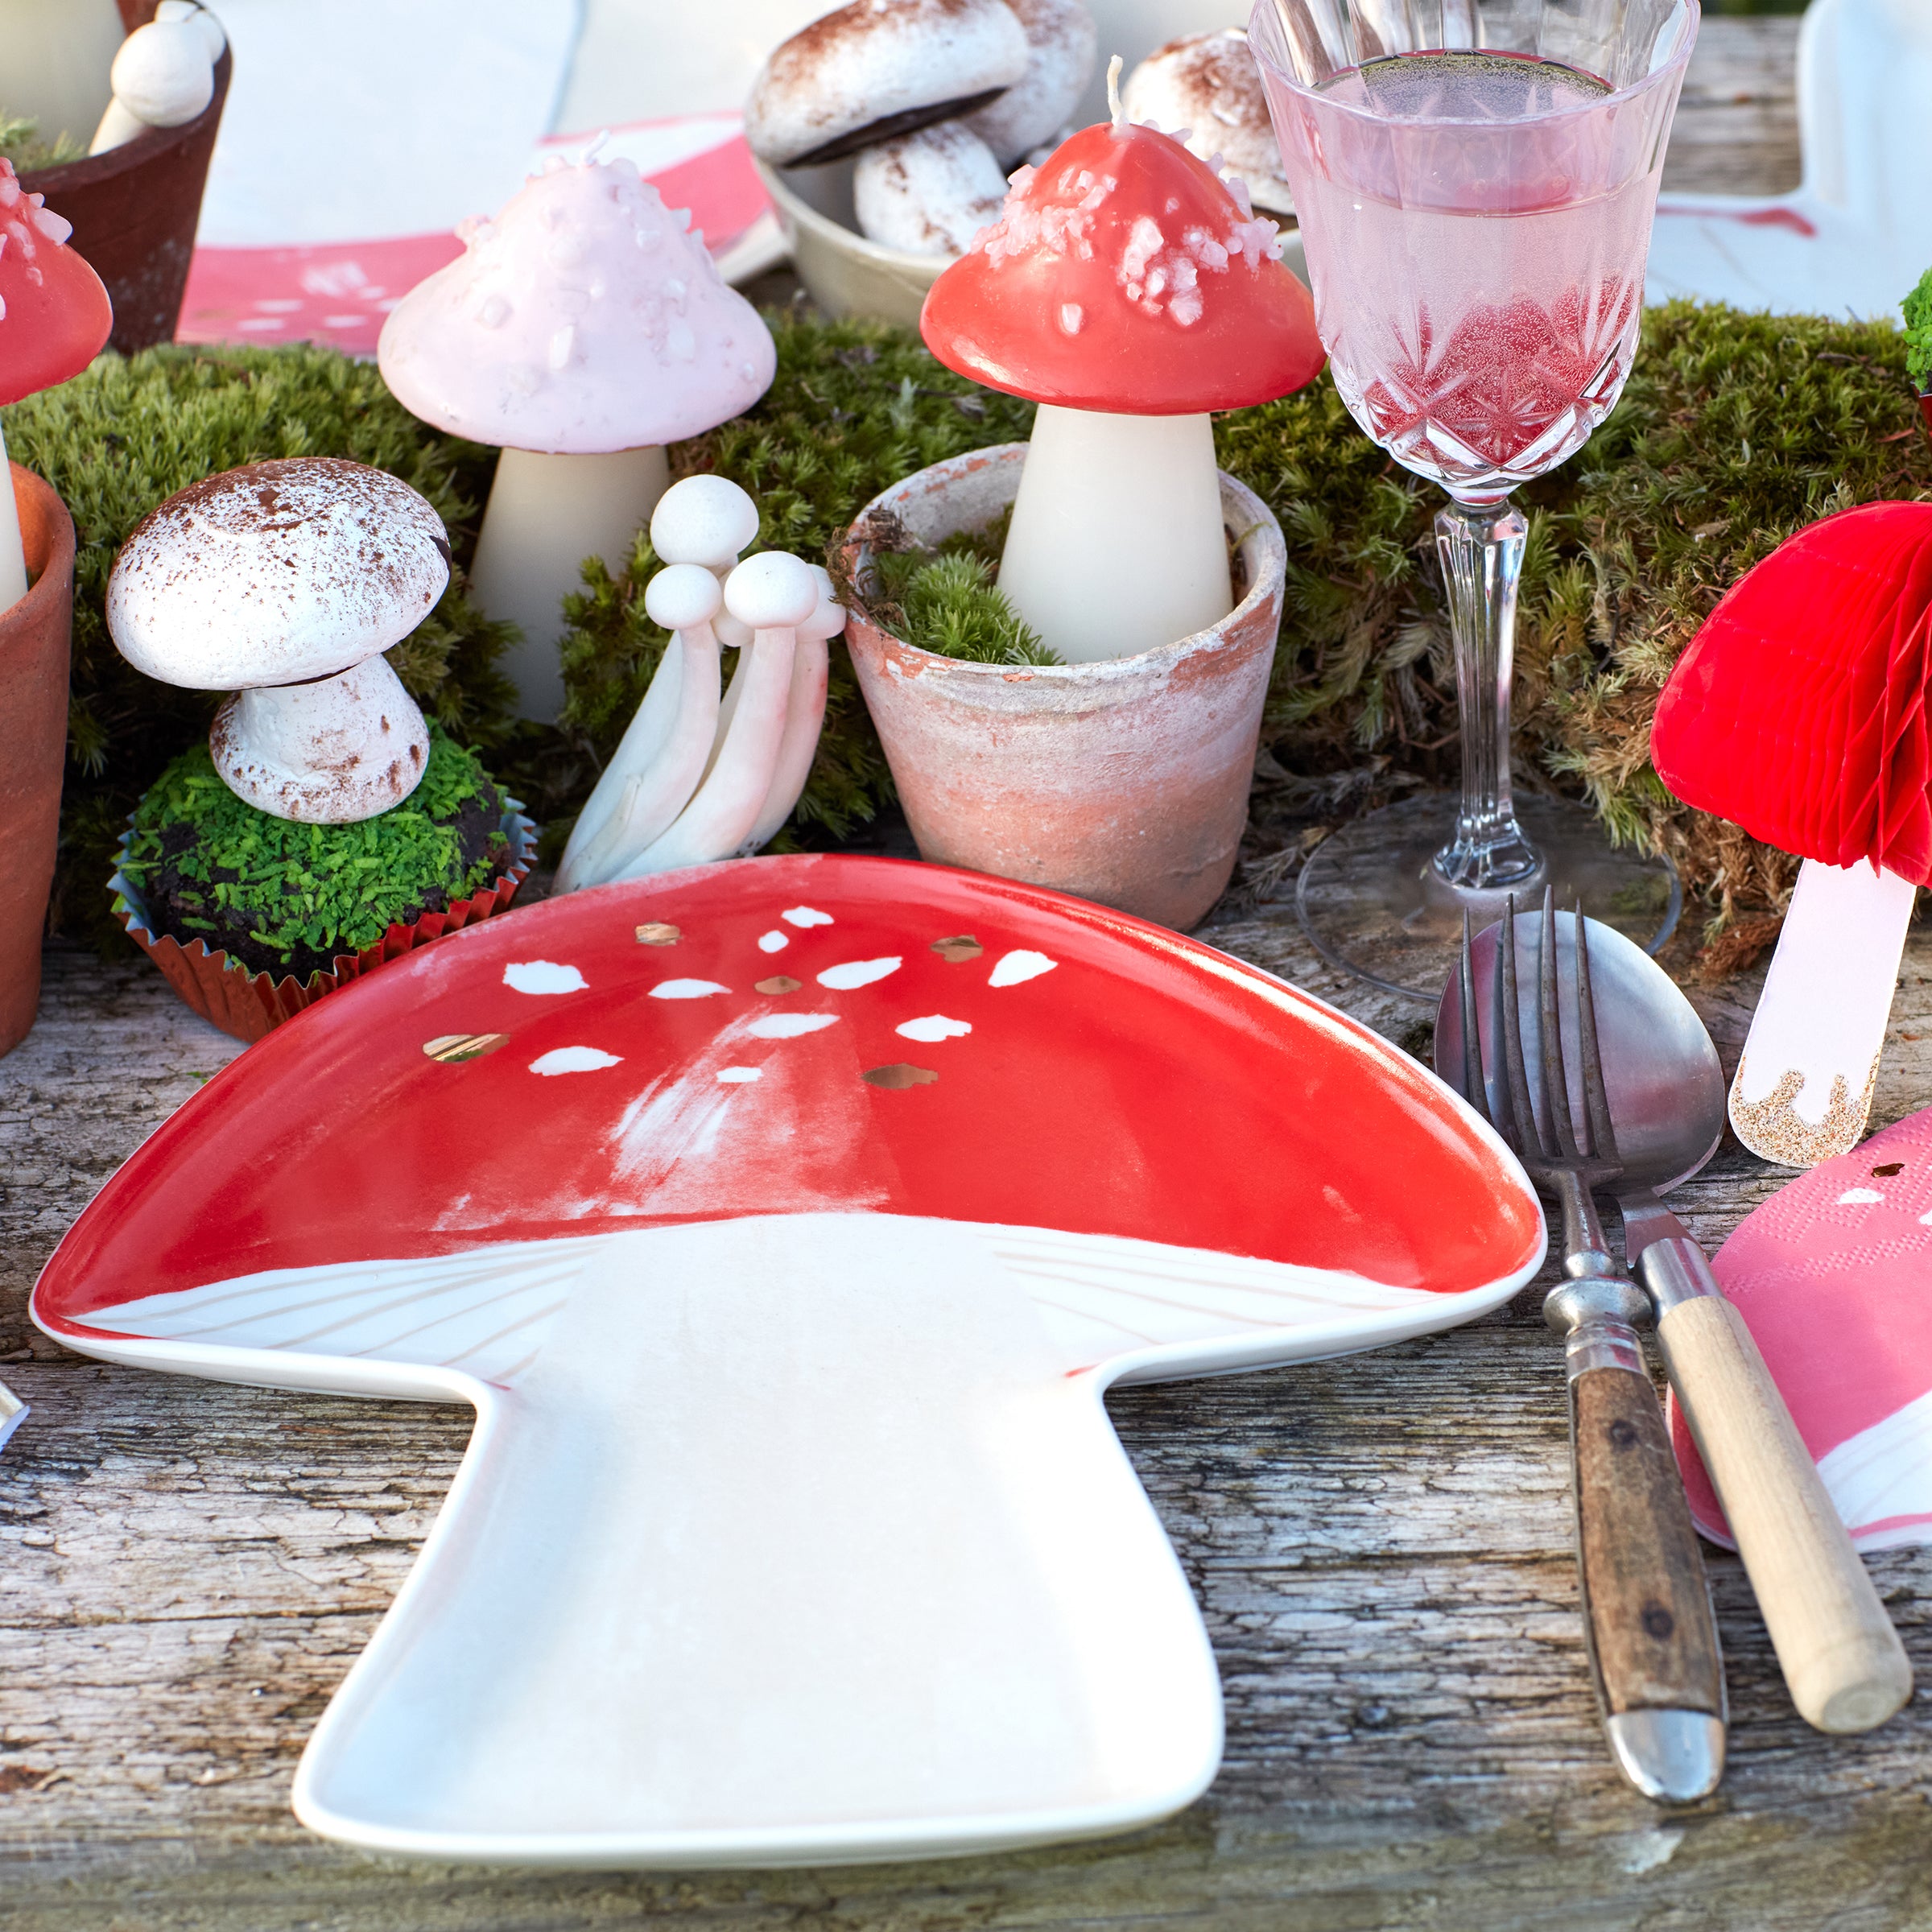 Our party candles, in the shape of 3D mushrooms, are perfect as candle decorations and as a hostess gift.